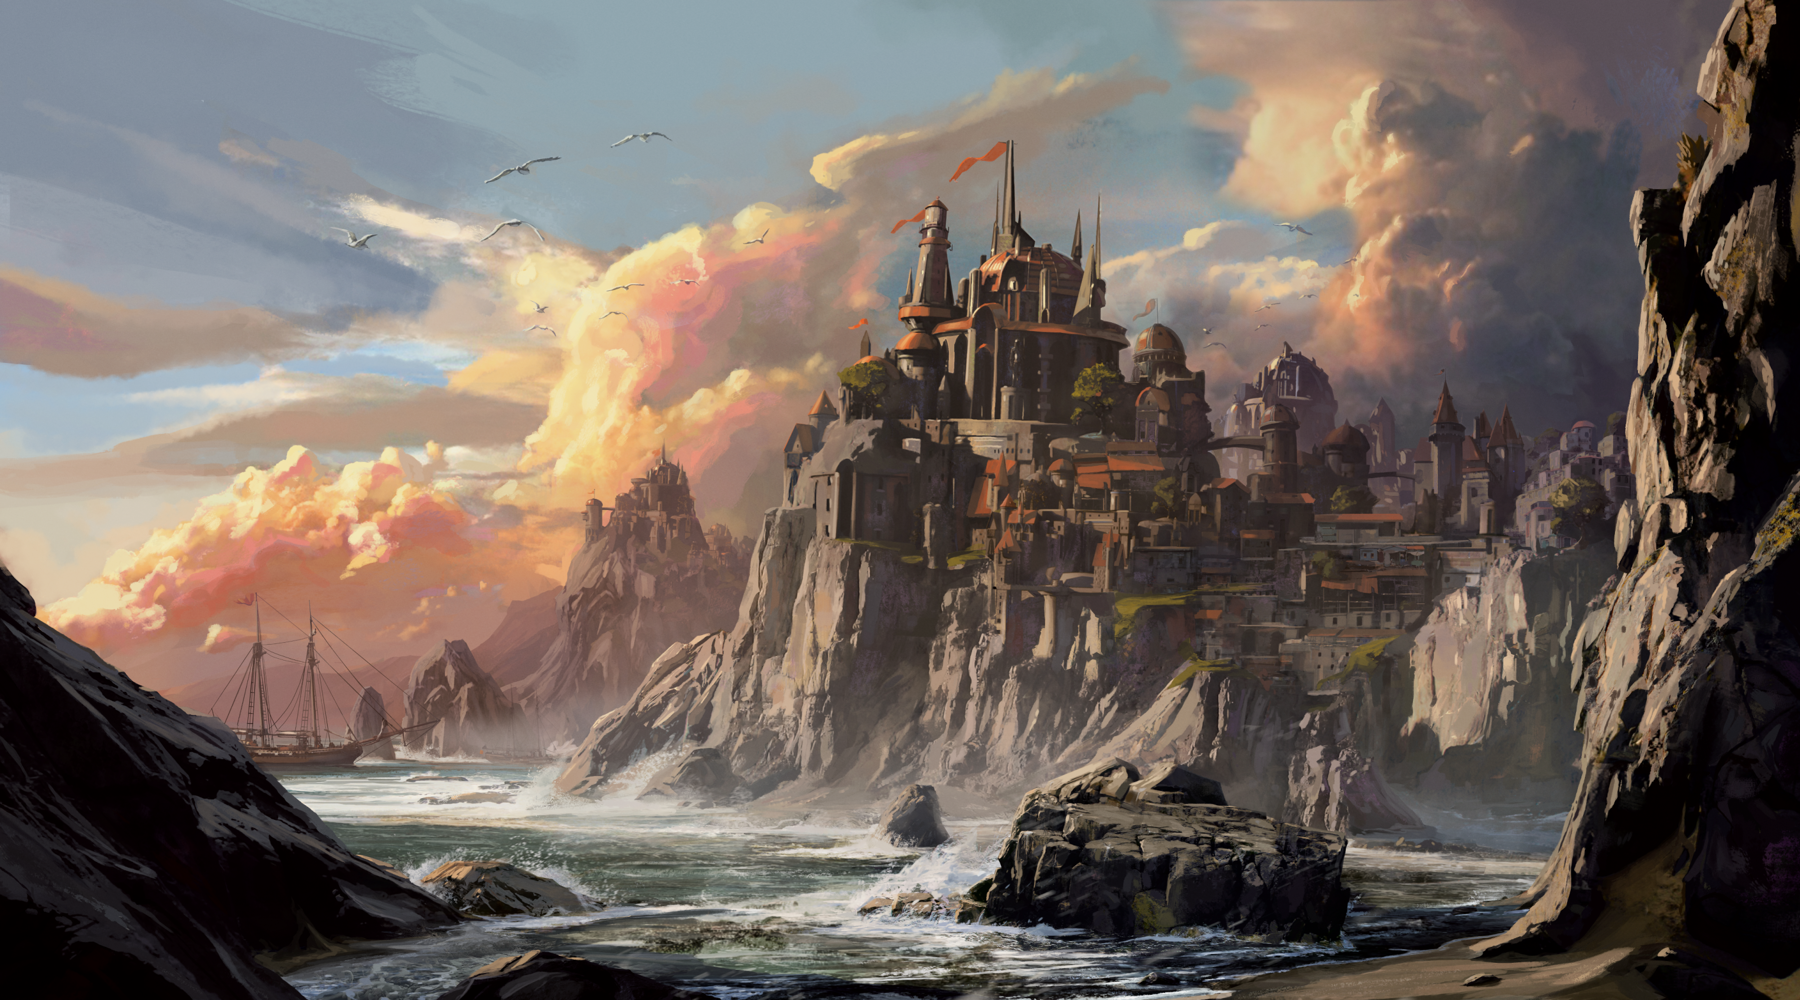 An image of a Dungeons and Dragons coastal landscape